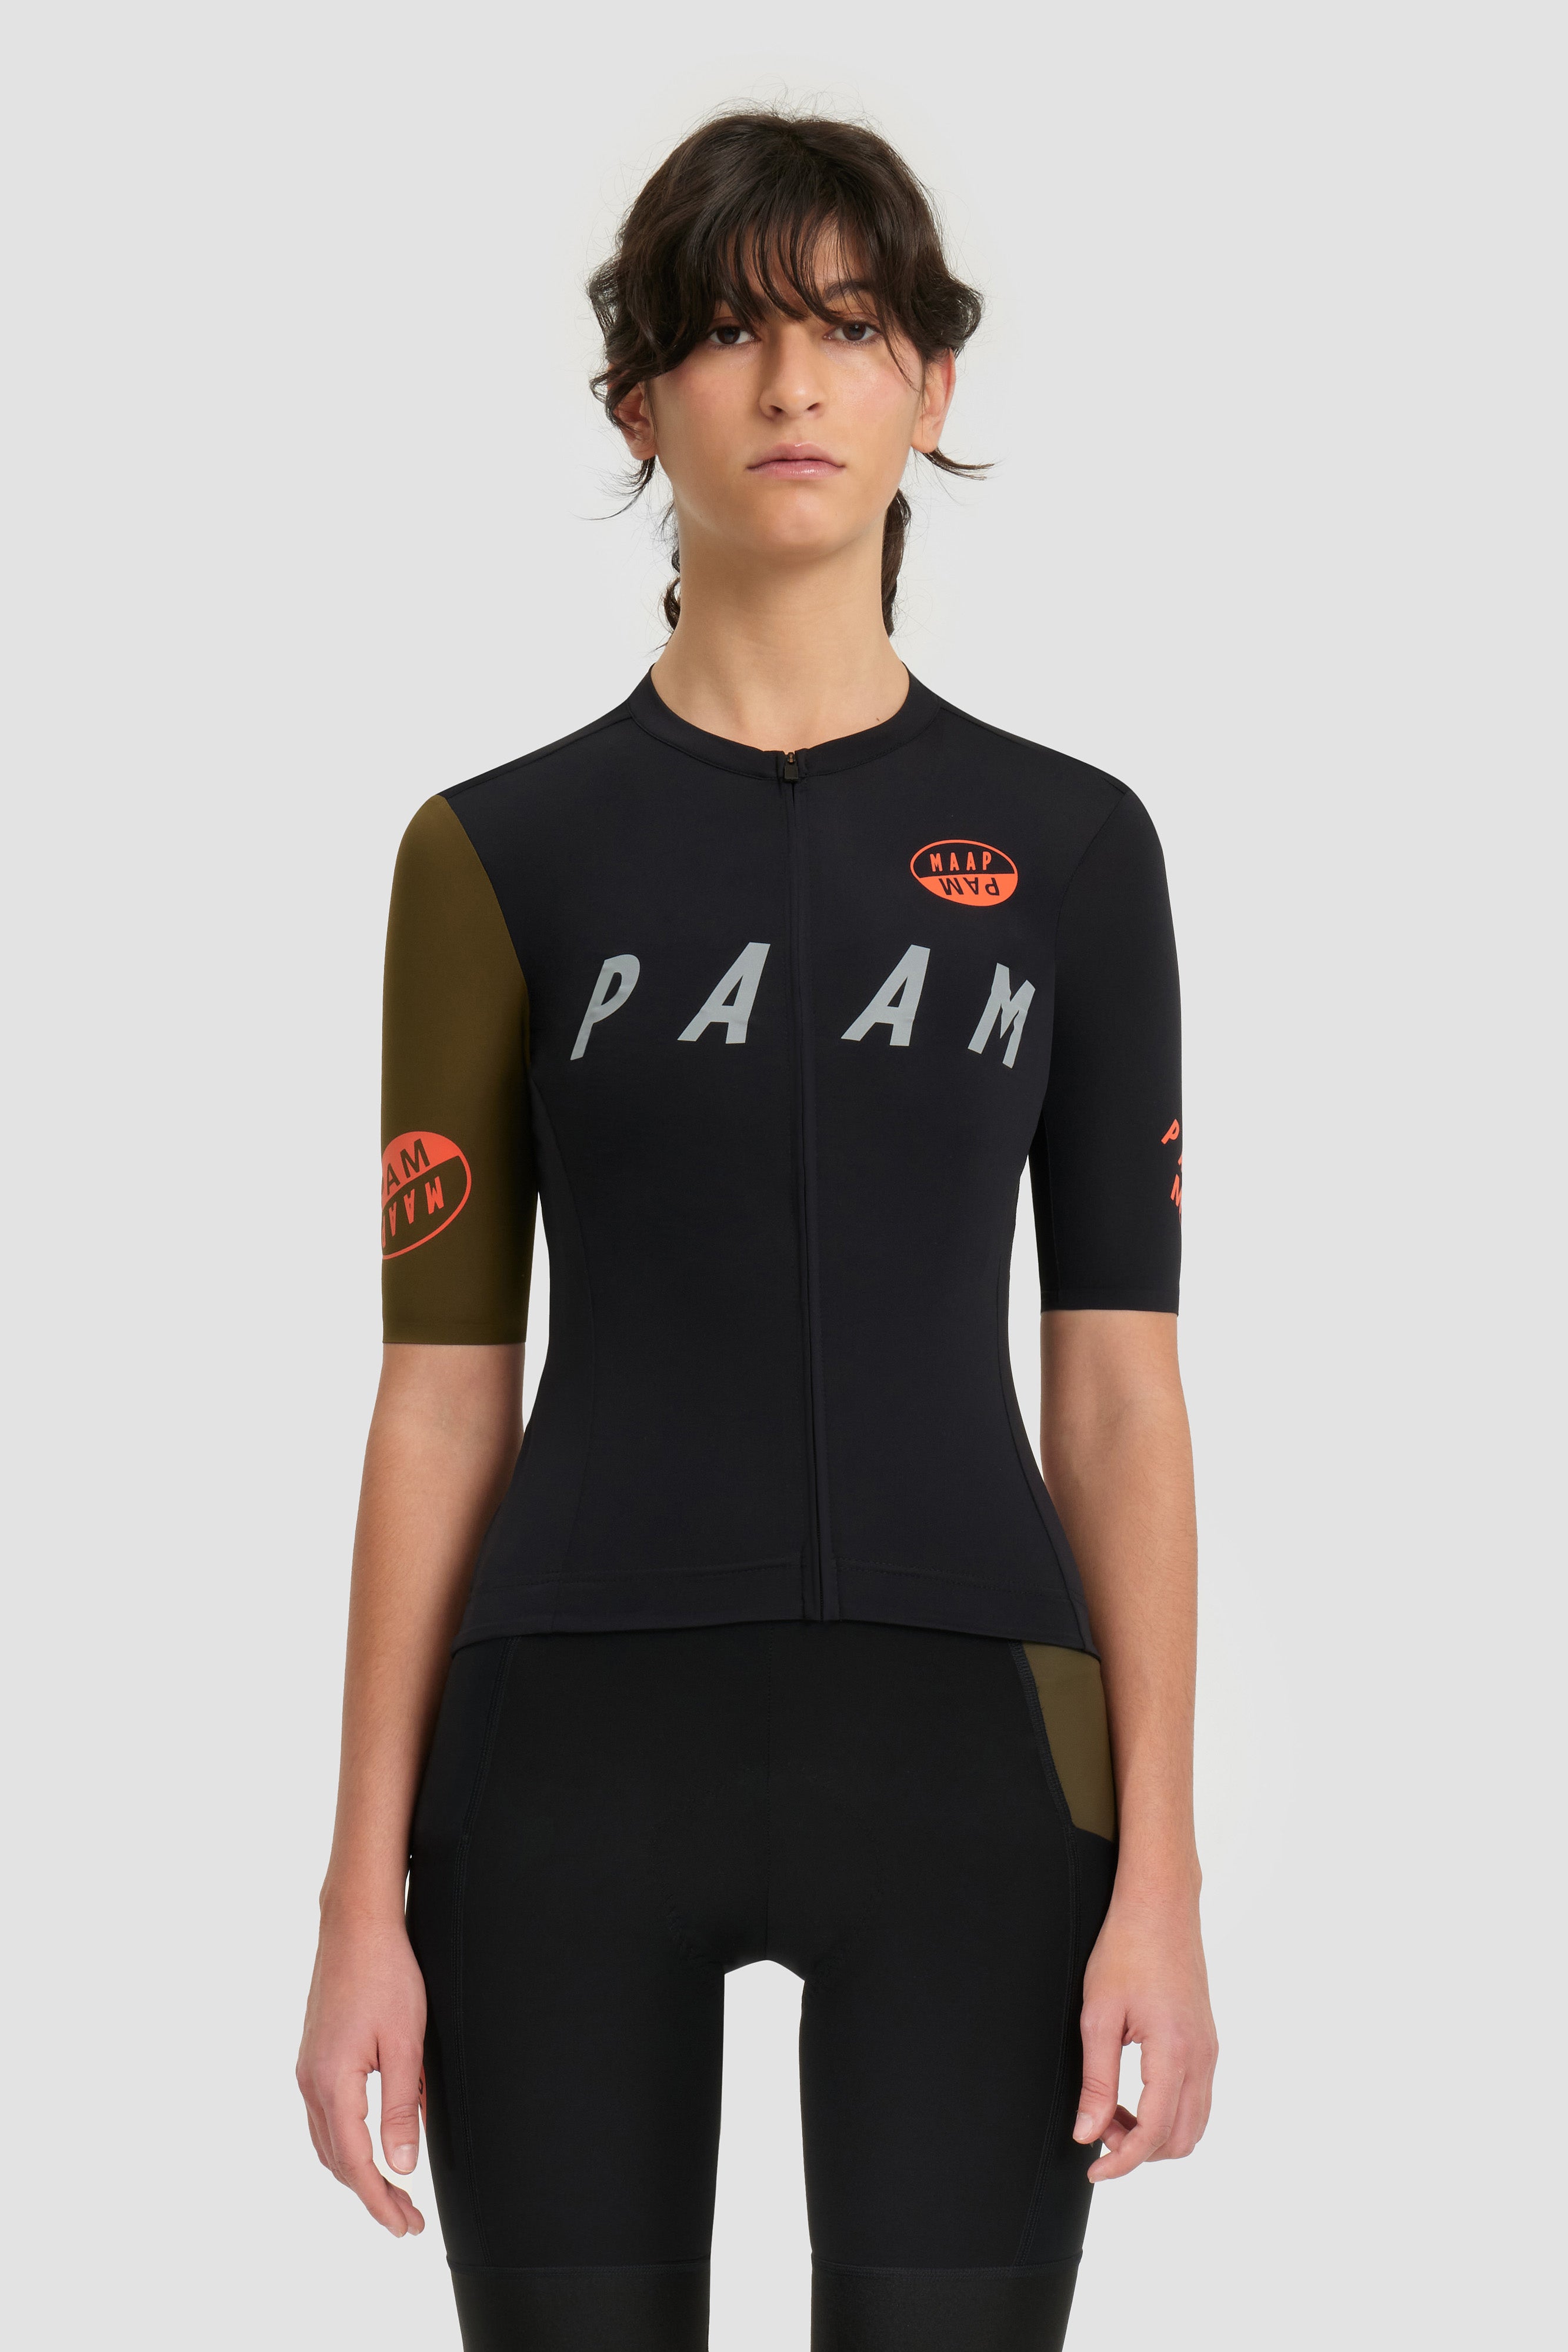 The PAAM 2.0 WOMEN'S TEAM JERSEY  available online with global shipping, and in PAM Stores Melbourne and Sydney.